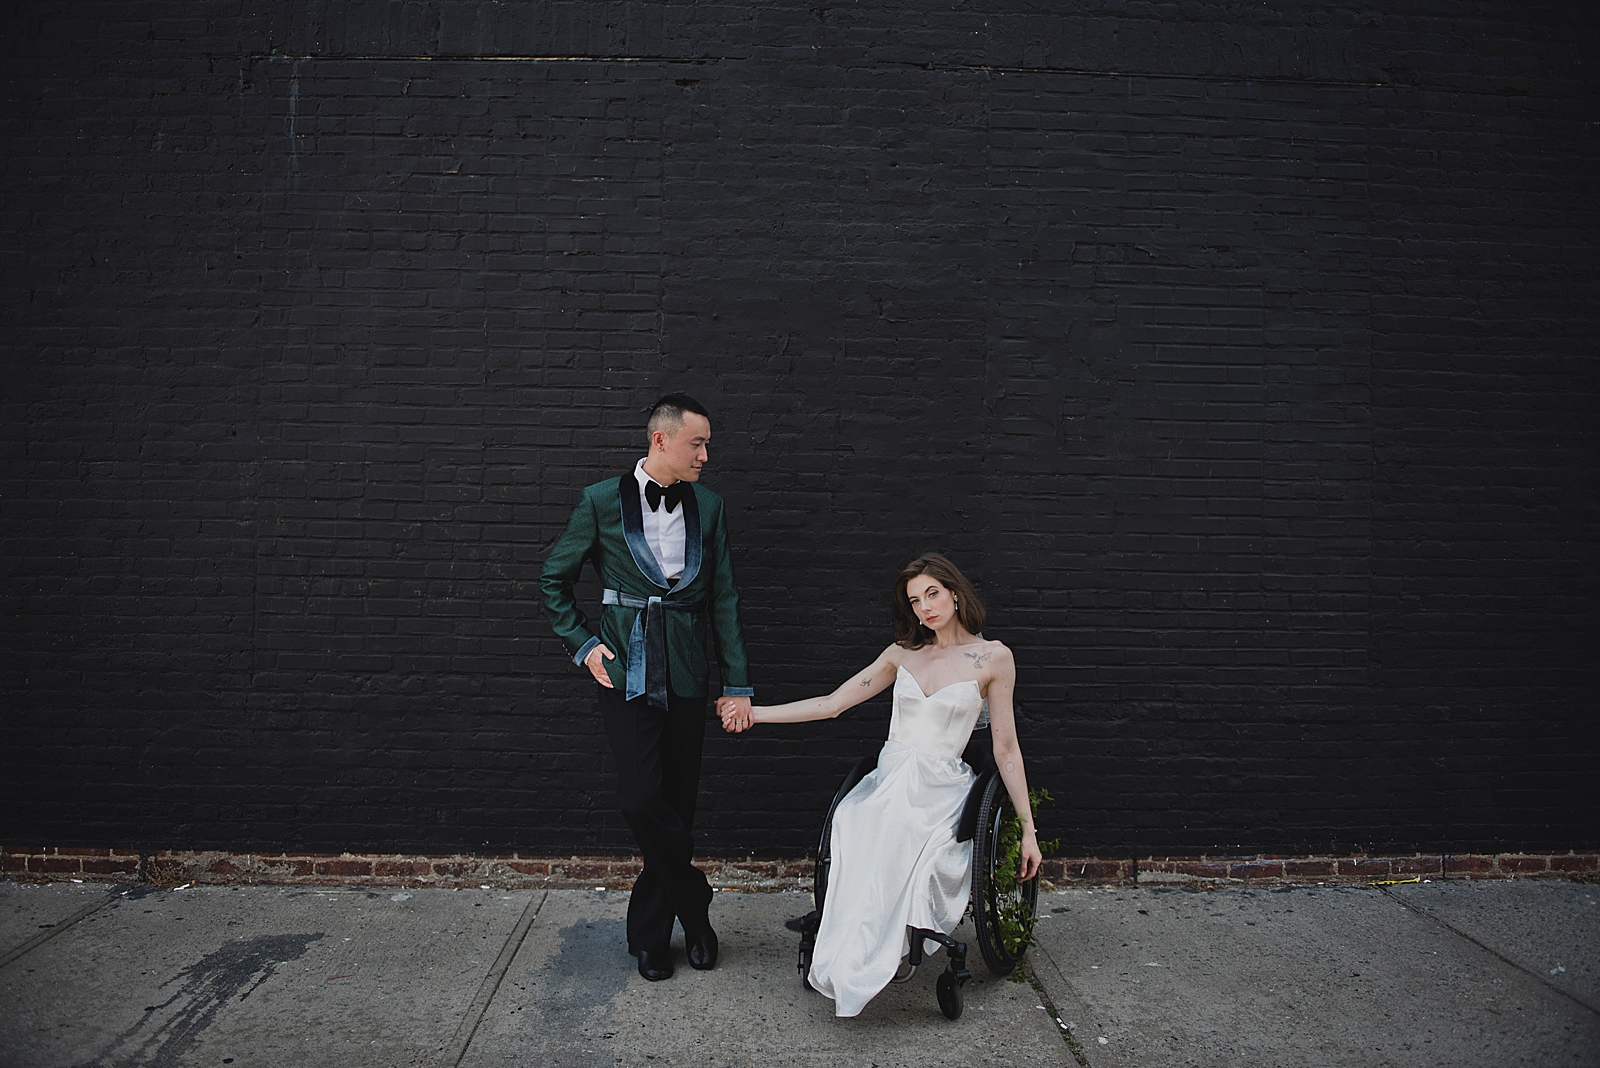 Full shot of the bride and groom posing in front of a black painted brick wall. 